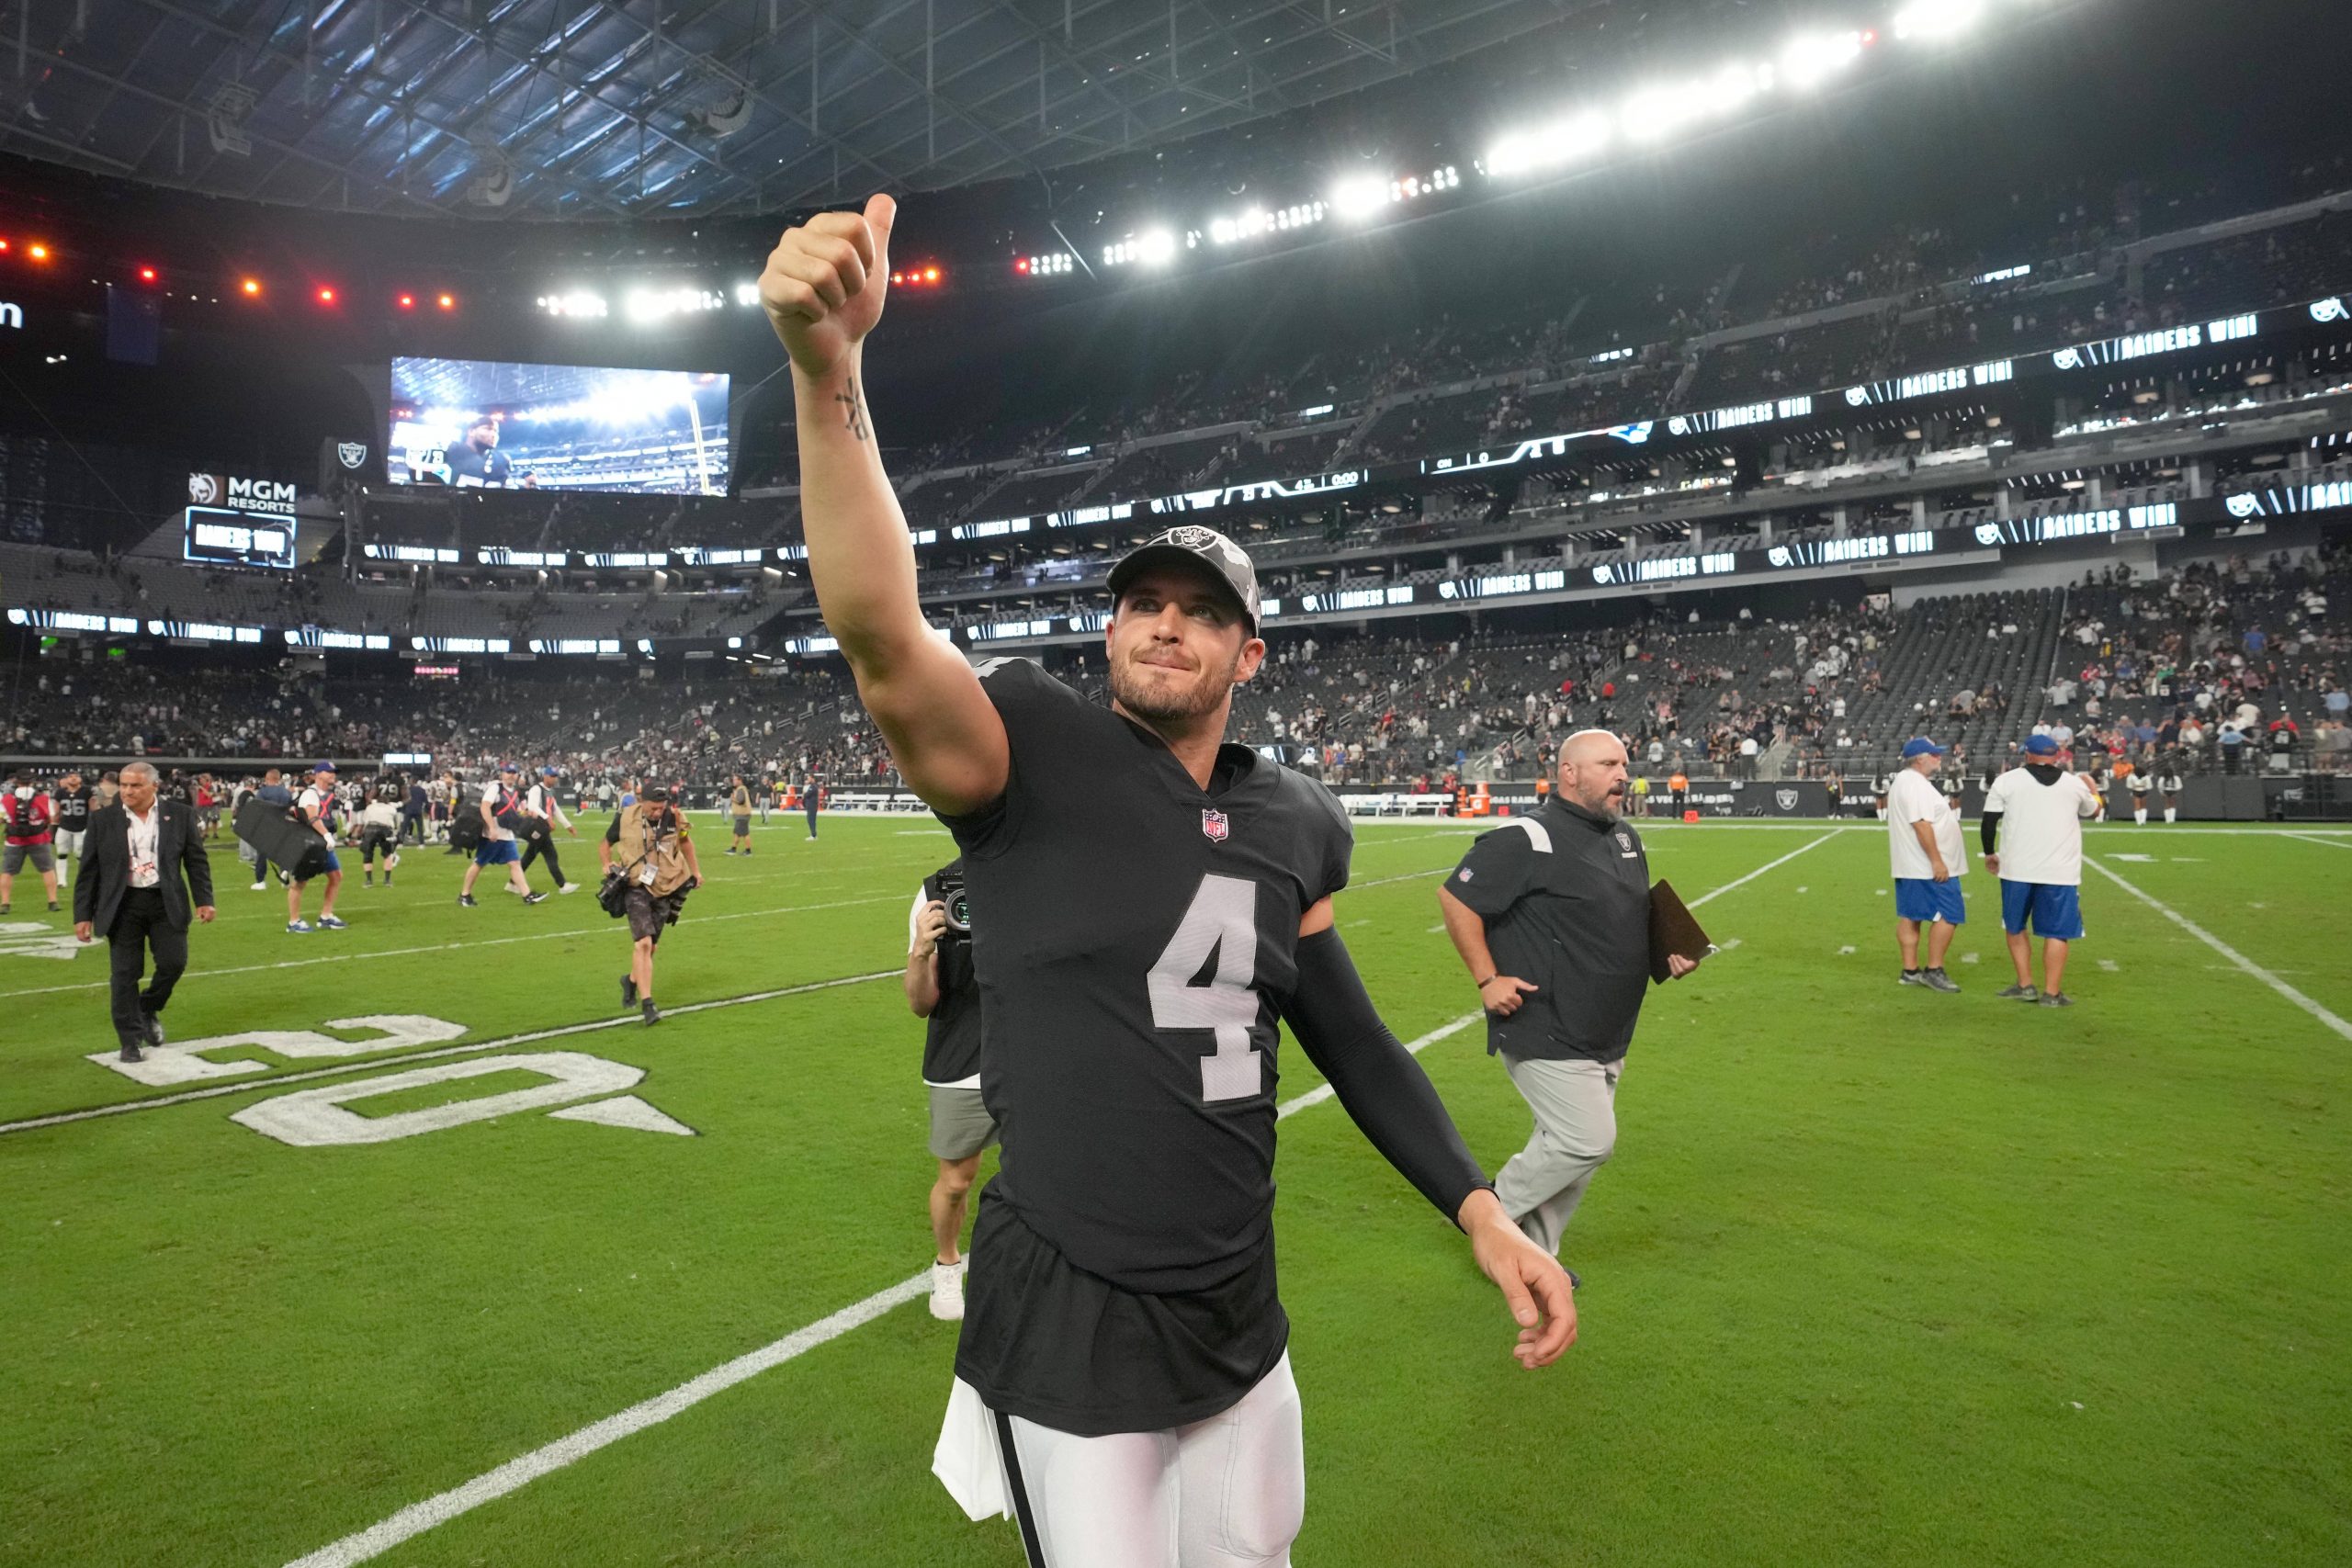 NFL, American Football Herren, USA New England Patriots at Las Vegas Raiders, Aug 26, 2022 Paradise, Nevada, USA Las Vegas Raiders quarterback Derek Carr 4 gestures toward the crowd after the game against the New England Patriots at Allegiant Stadium. Mandatory Credit: Kirby Lee-USA TODAY Sports, 26.08.2022 23:04:42, 18932209, NPStrans, Las Vegas Raiders, Derek Carr, NFL, New England Patriots, Allegiant Stadium, TopPic PUBLICATIONxINxGERxSUIxAUTxONLY Copyright: xKirbyxLeex 18932209